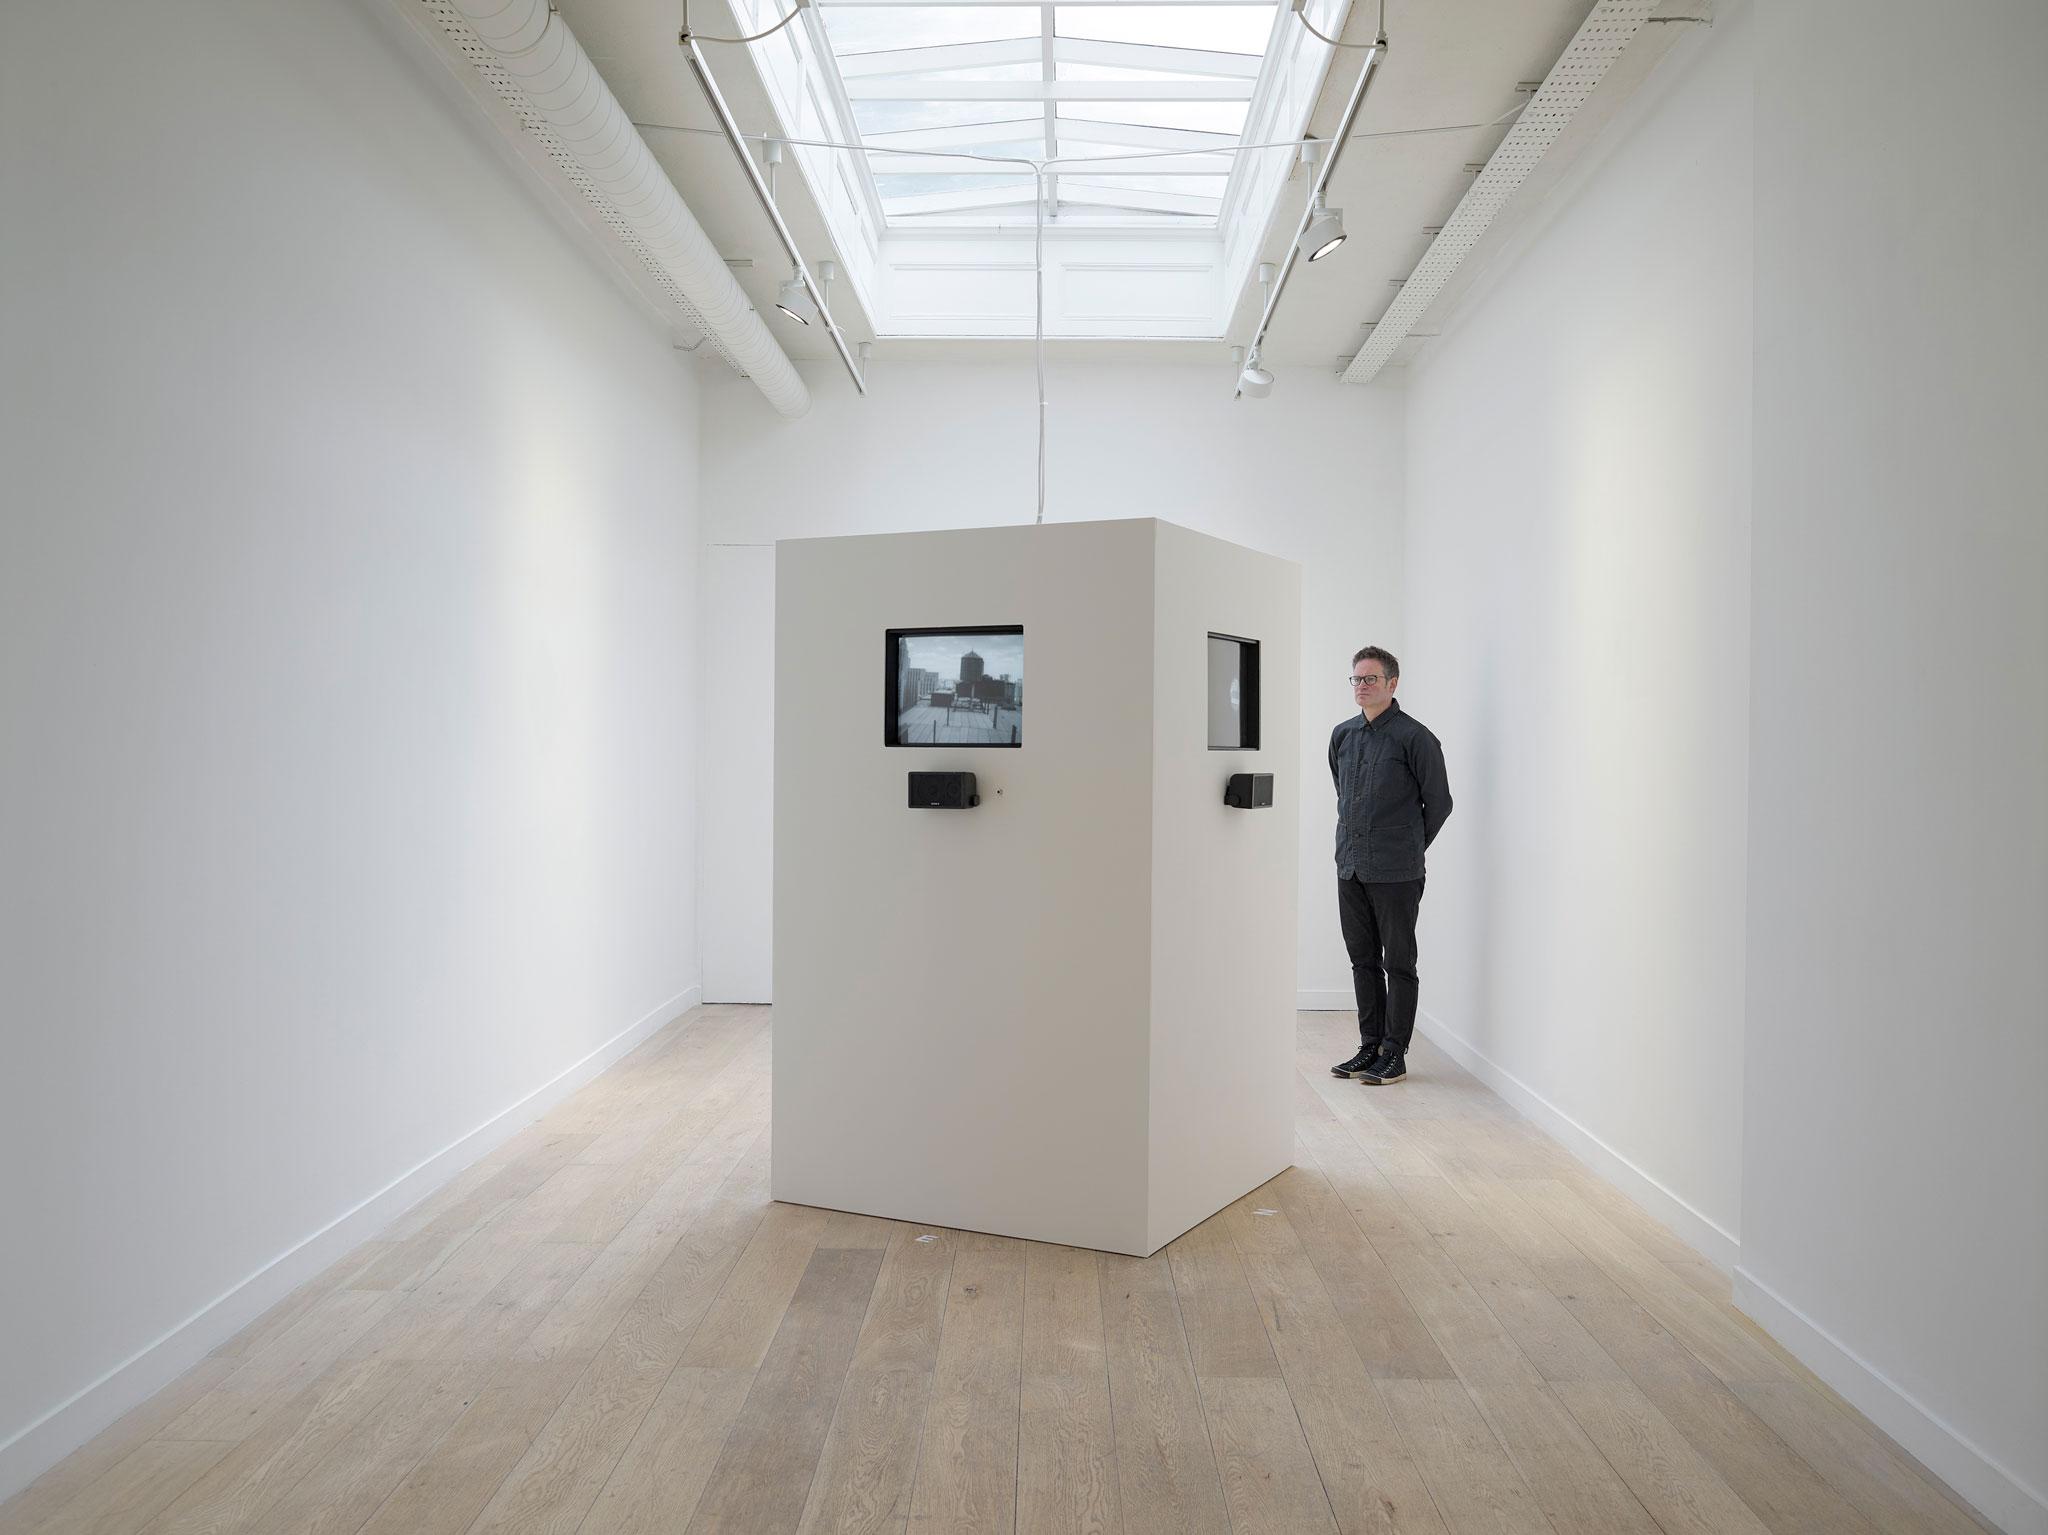 white room with a large white box in the center containing television monitors playing black and white video. One figure standing watching